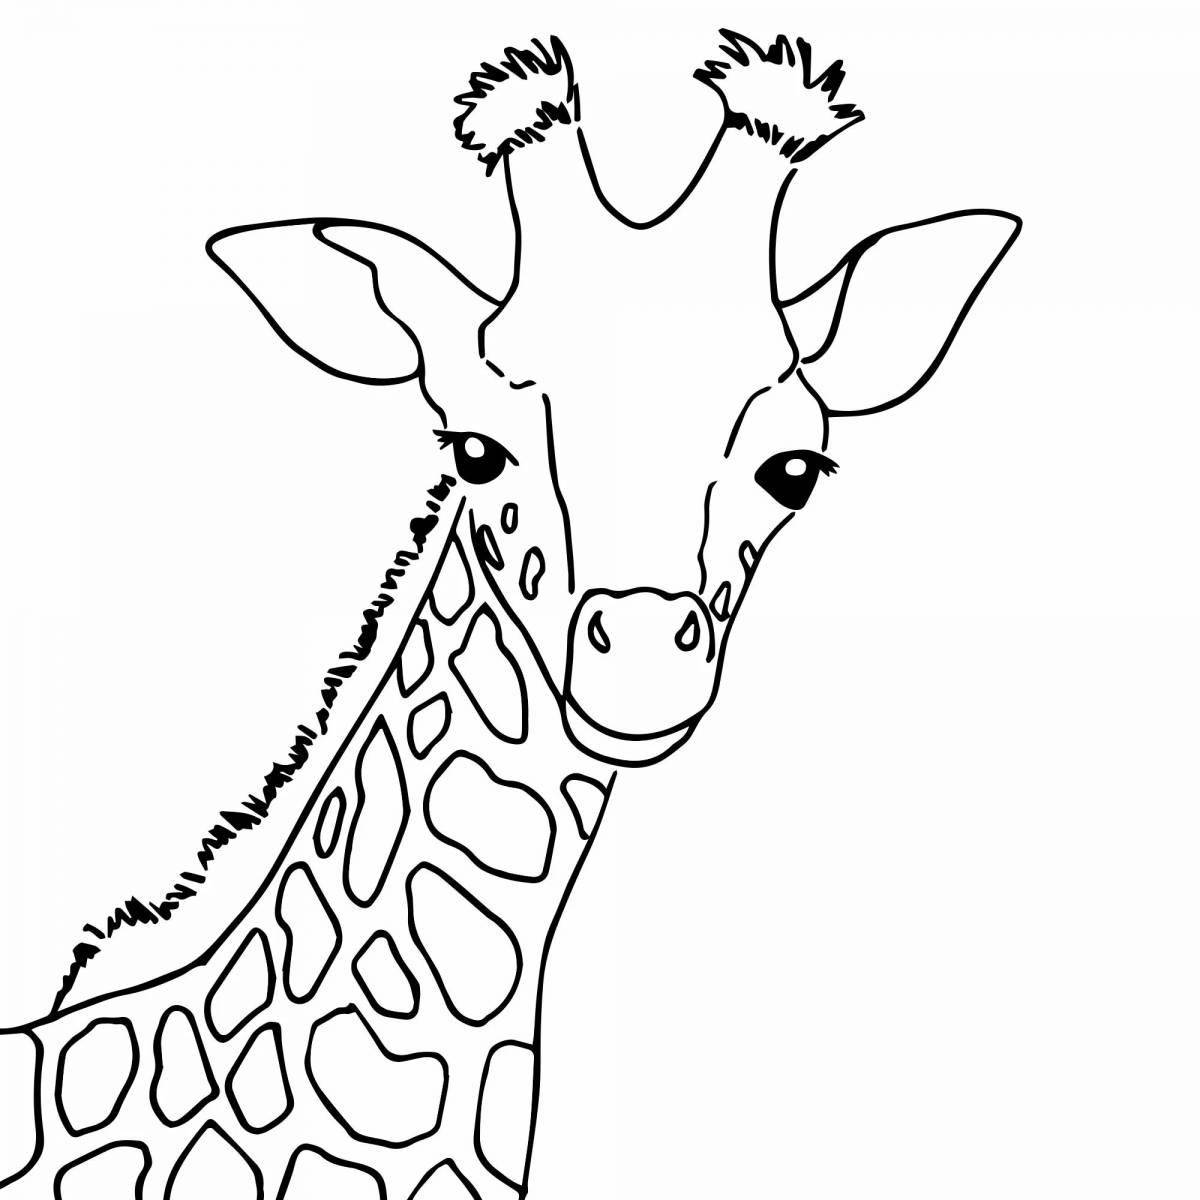 Colorful giraffe coloring page